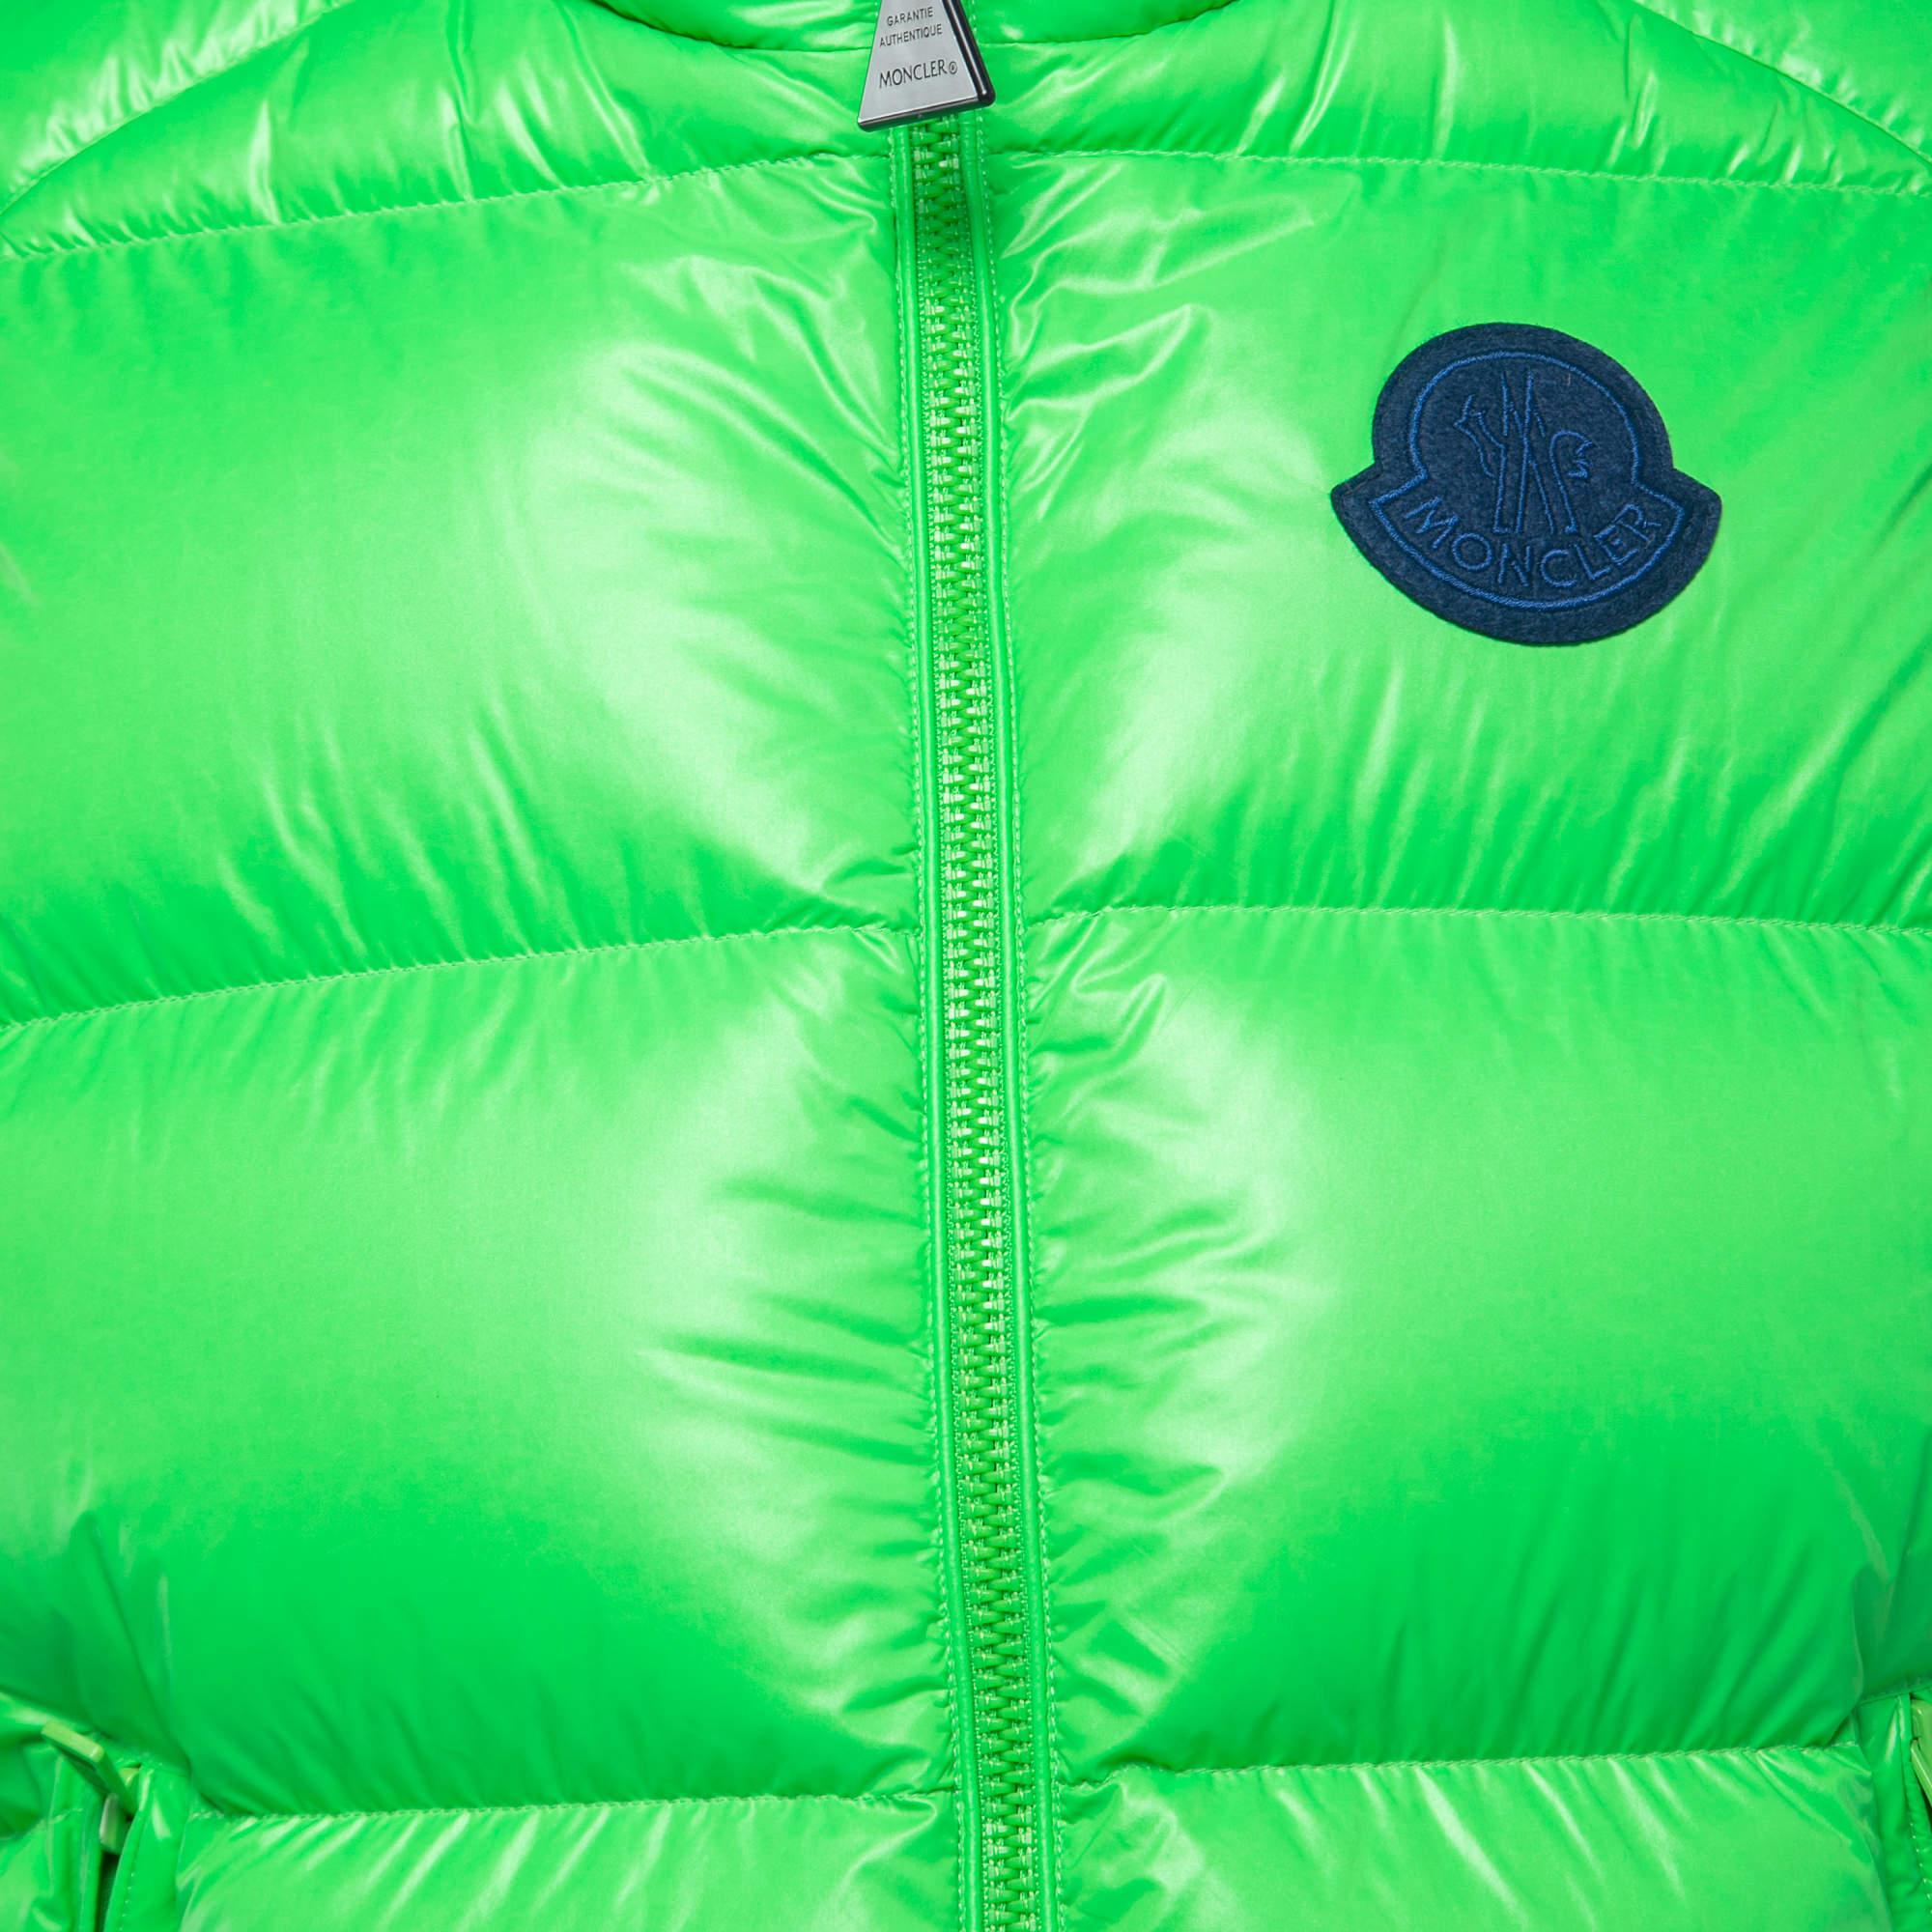 The Moncler vest is a stylish outerwear piece. Crafted from high-quality nylon, it features a green design with the iconic logo patch prominently displayed. This sleeveless puffer vest combines fashion and functionality, making it perfect for